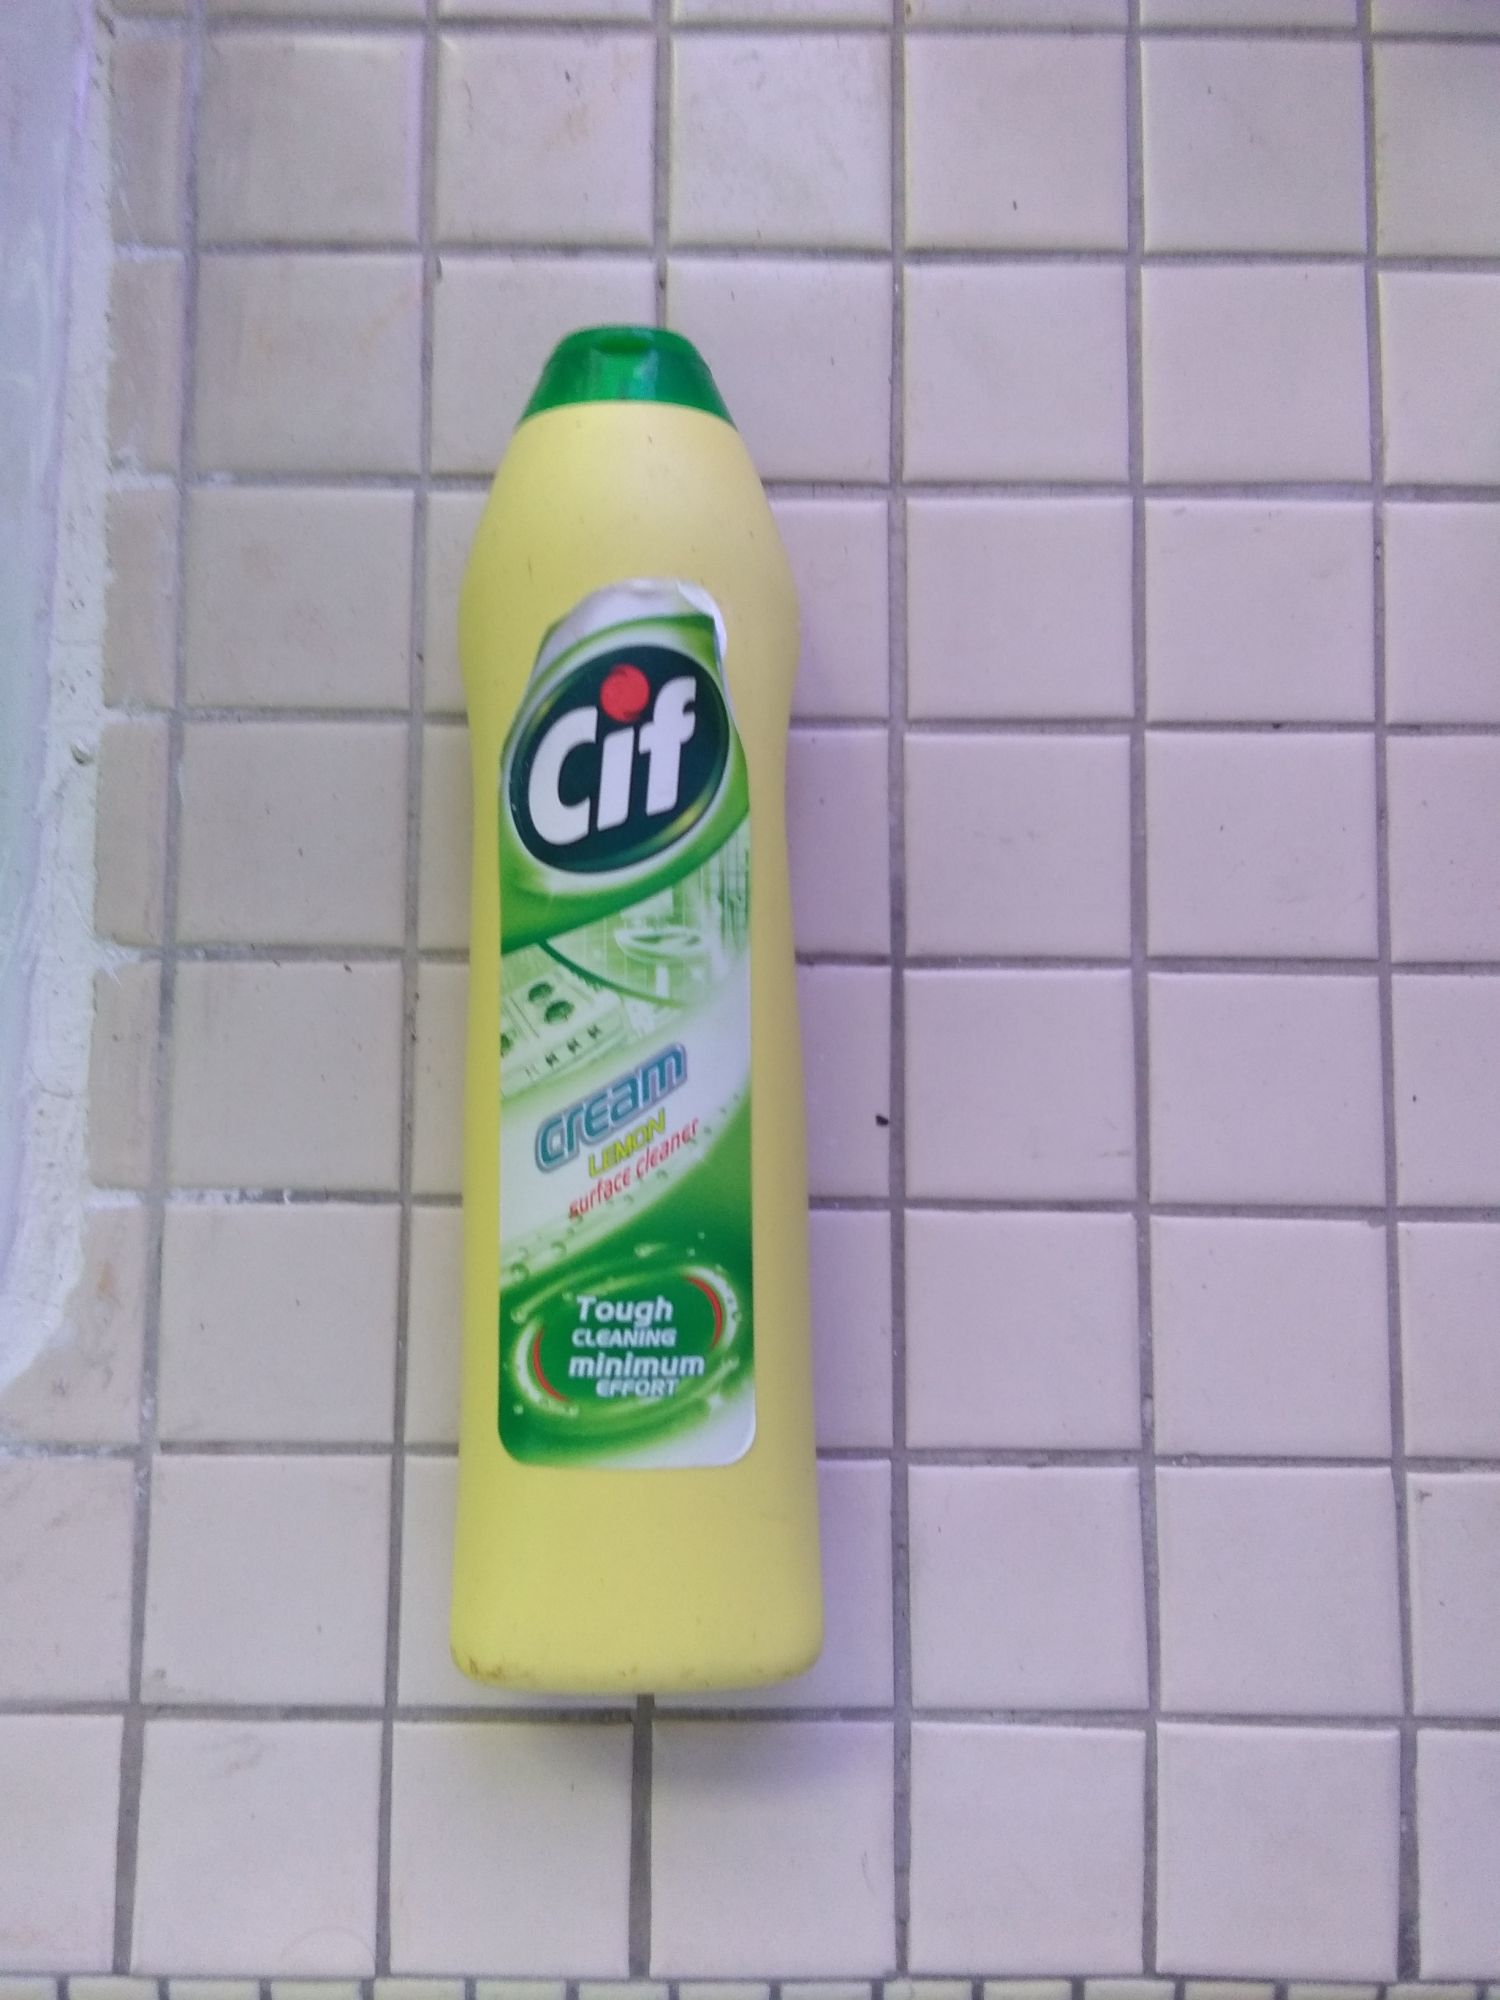 This is a bit of me and my life - Cif cream cleaner fragrance Lemon 🍋